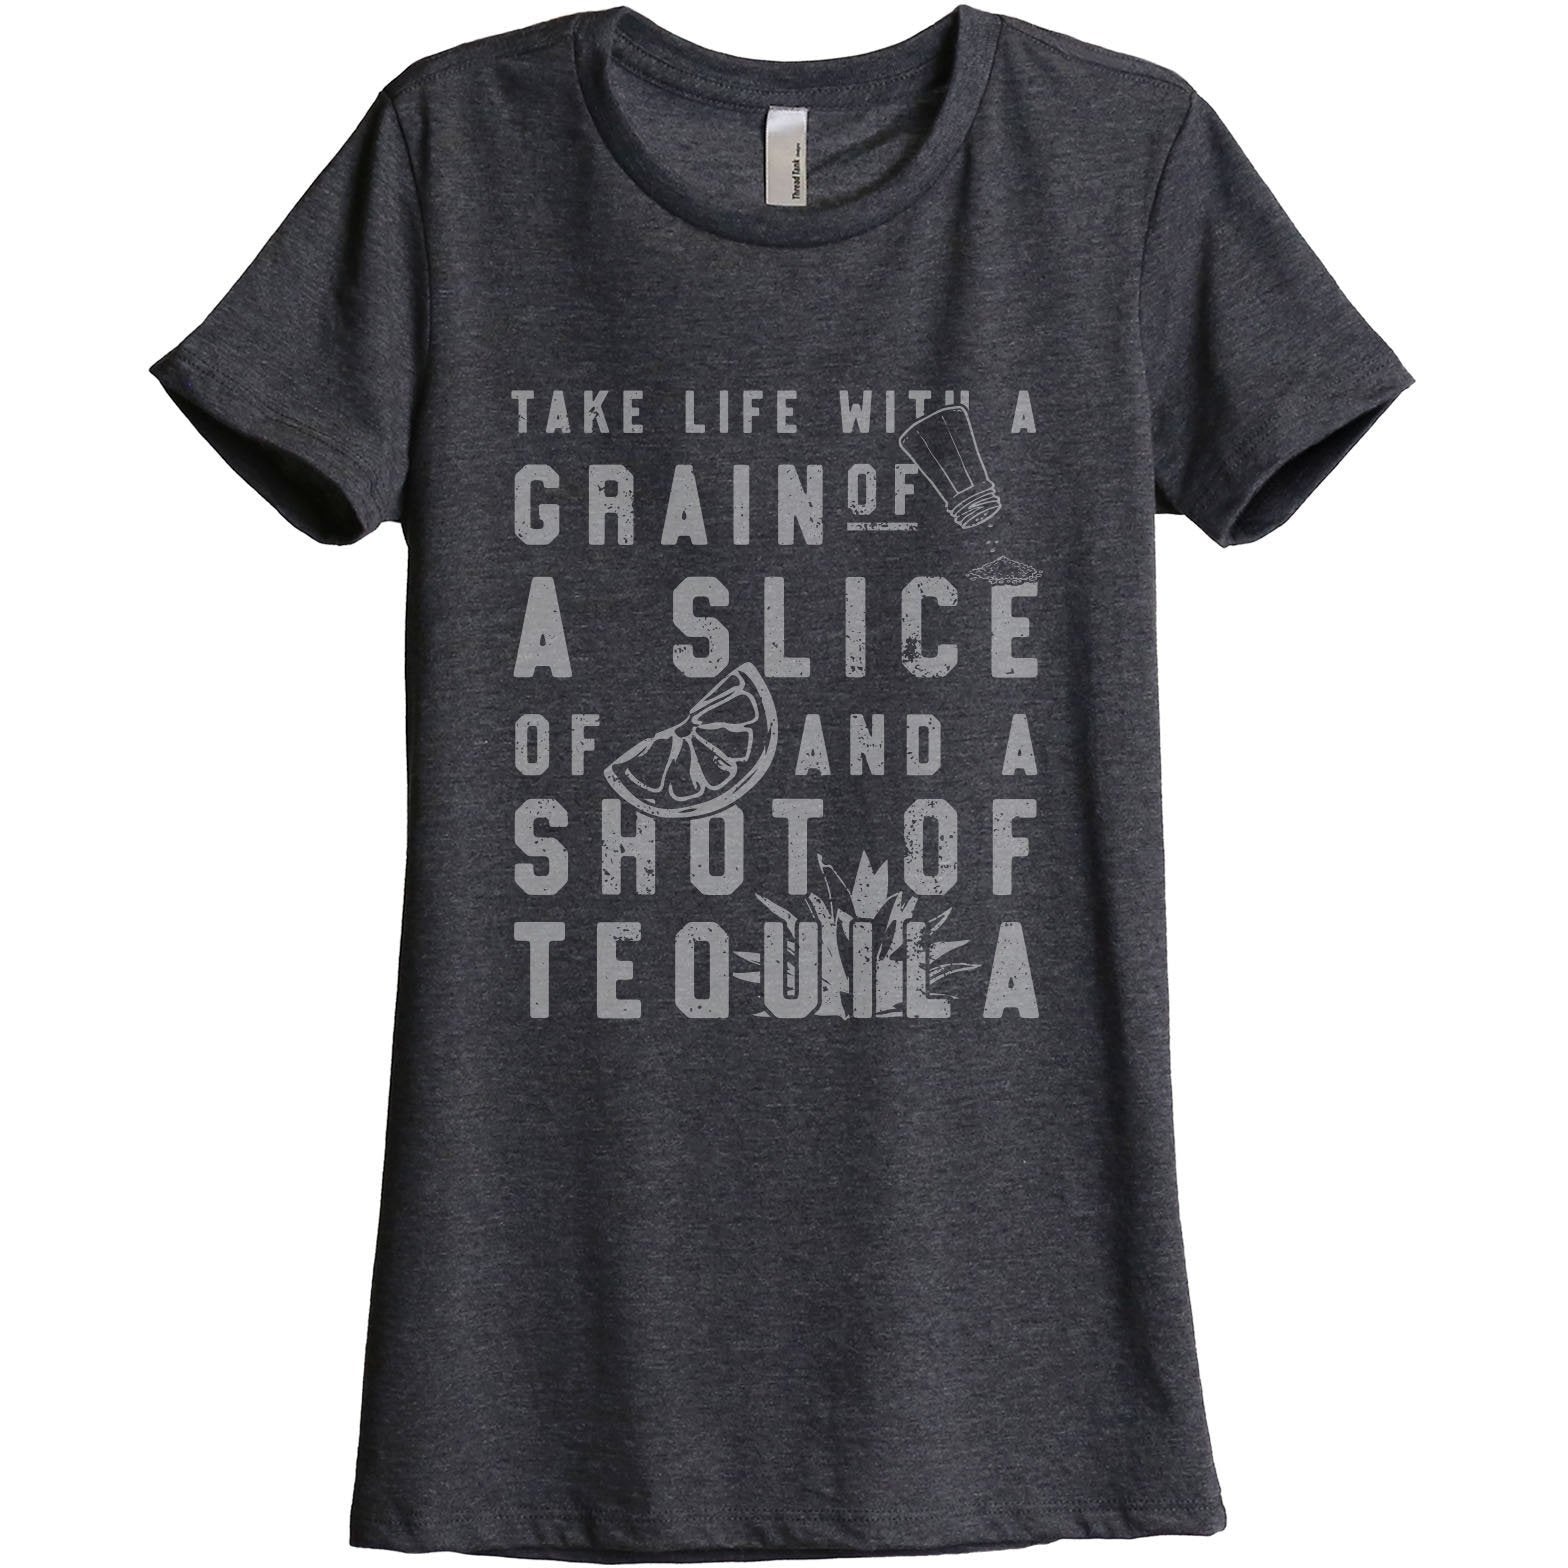 Grain Of Salt Slice Of Lime Shot Of Tequila Women's Relaxed Crewneck T-Shirt Top Tee Charcoal Grey
